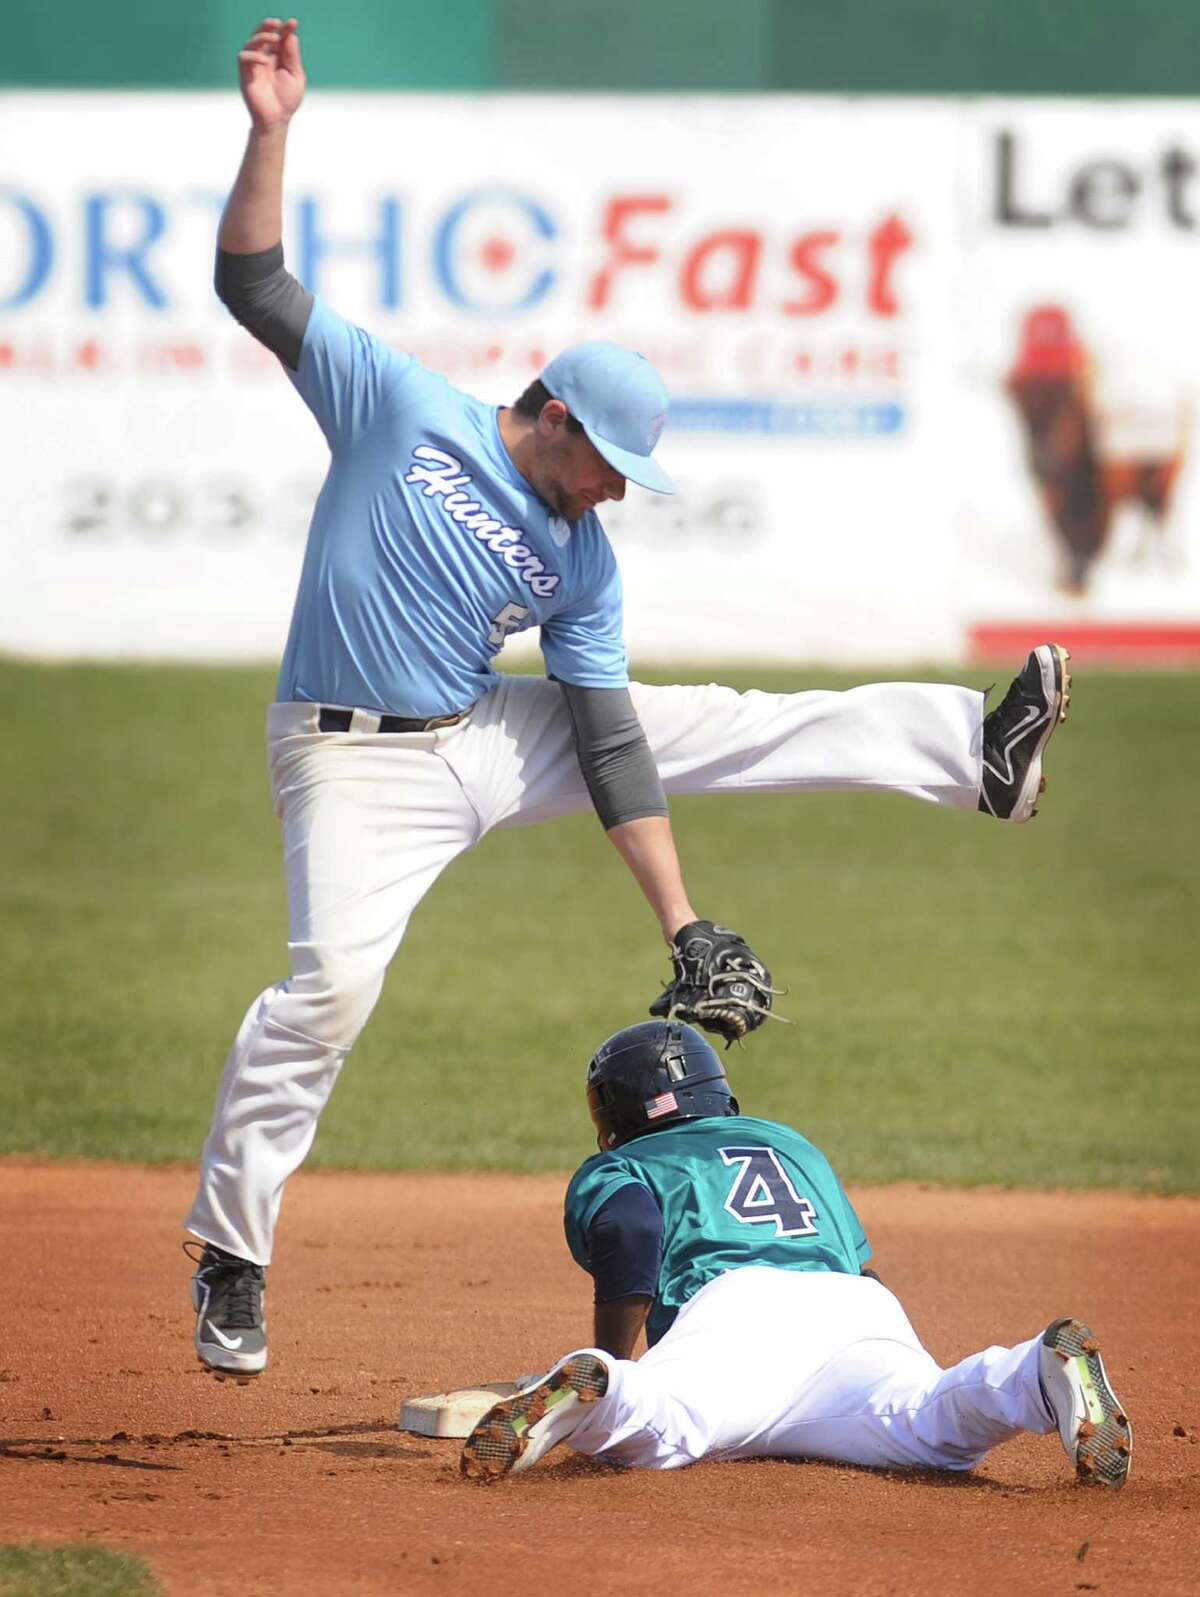 Bluefish Ruben Sosa, Jr. steals second base as Milford Hunters' shortstop John Ascenzia takes the high throw from catcher during the first inning of their spring training baseball game at Harbor Yard Ballpark in Bridgeport, Conn. on Tuesday, April 19, 2016.